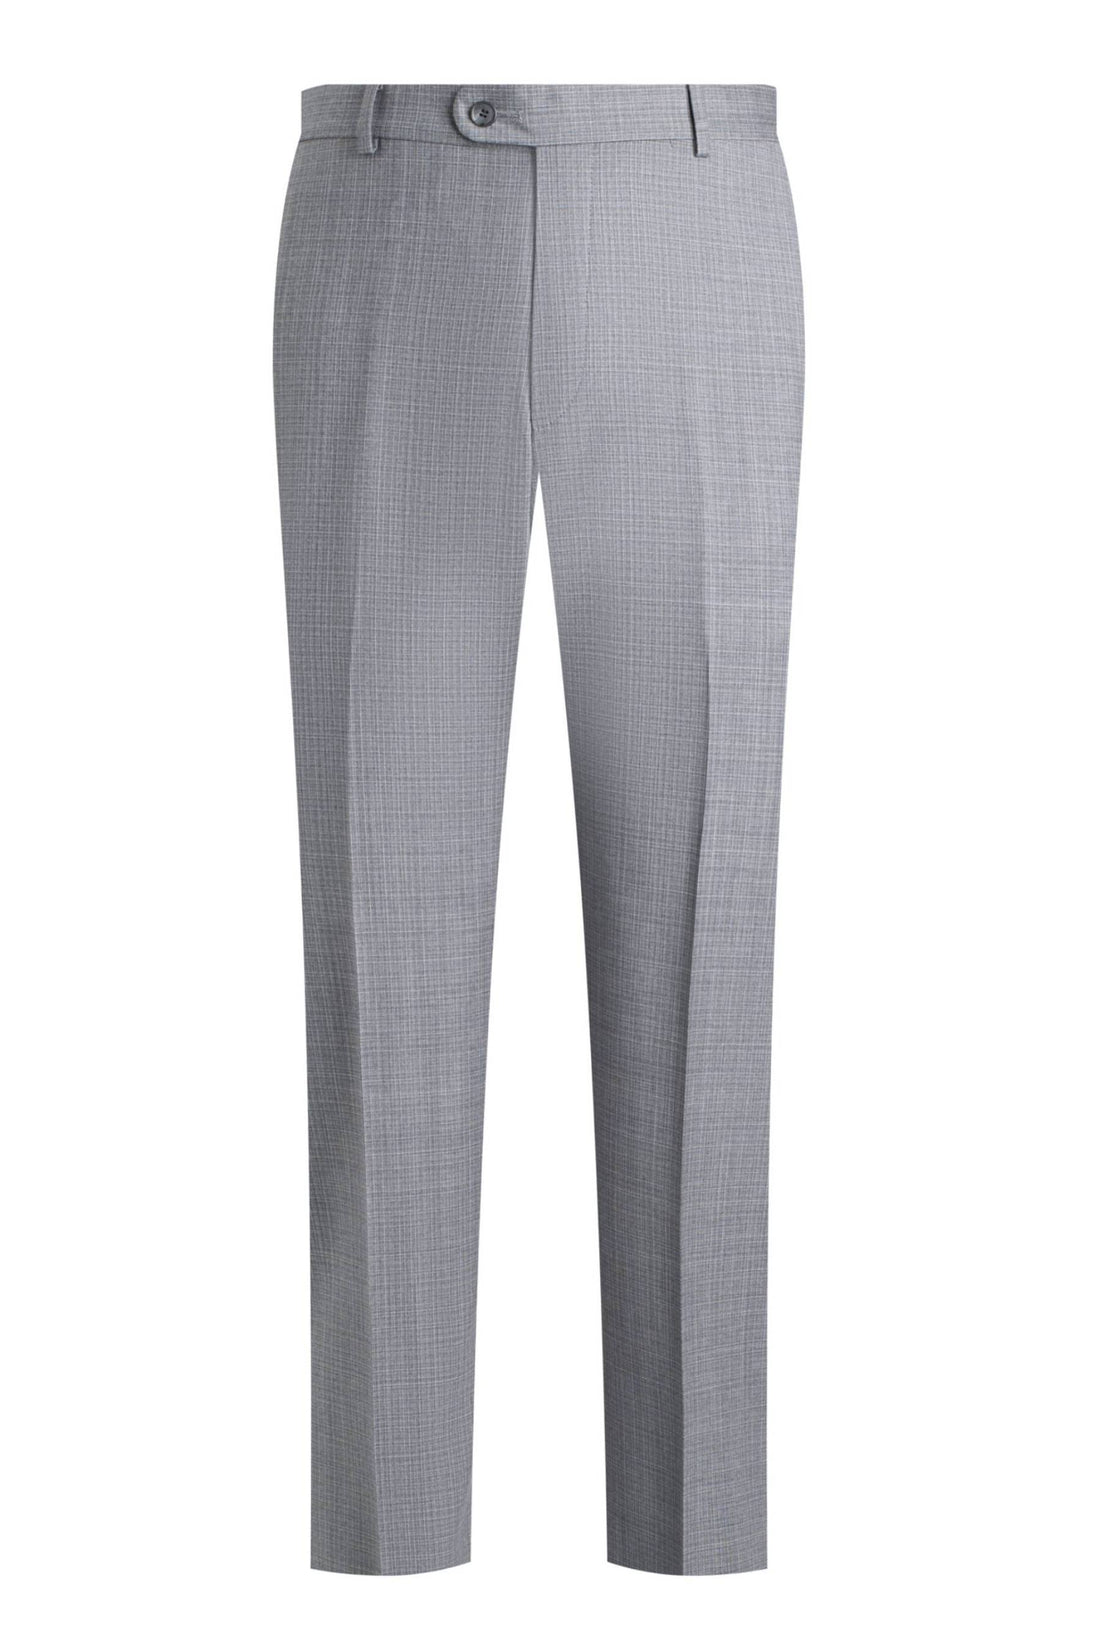 Heritage Gold Grey 130's Neat Suit Pant